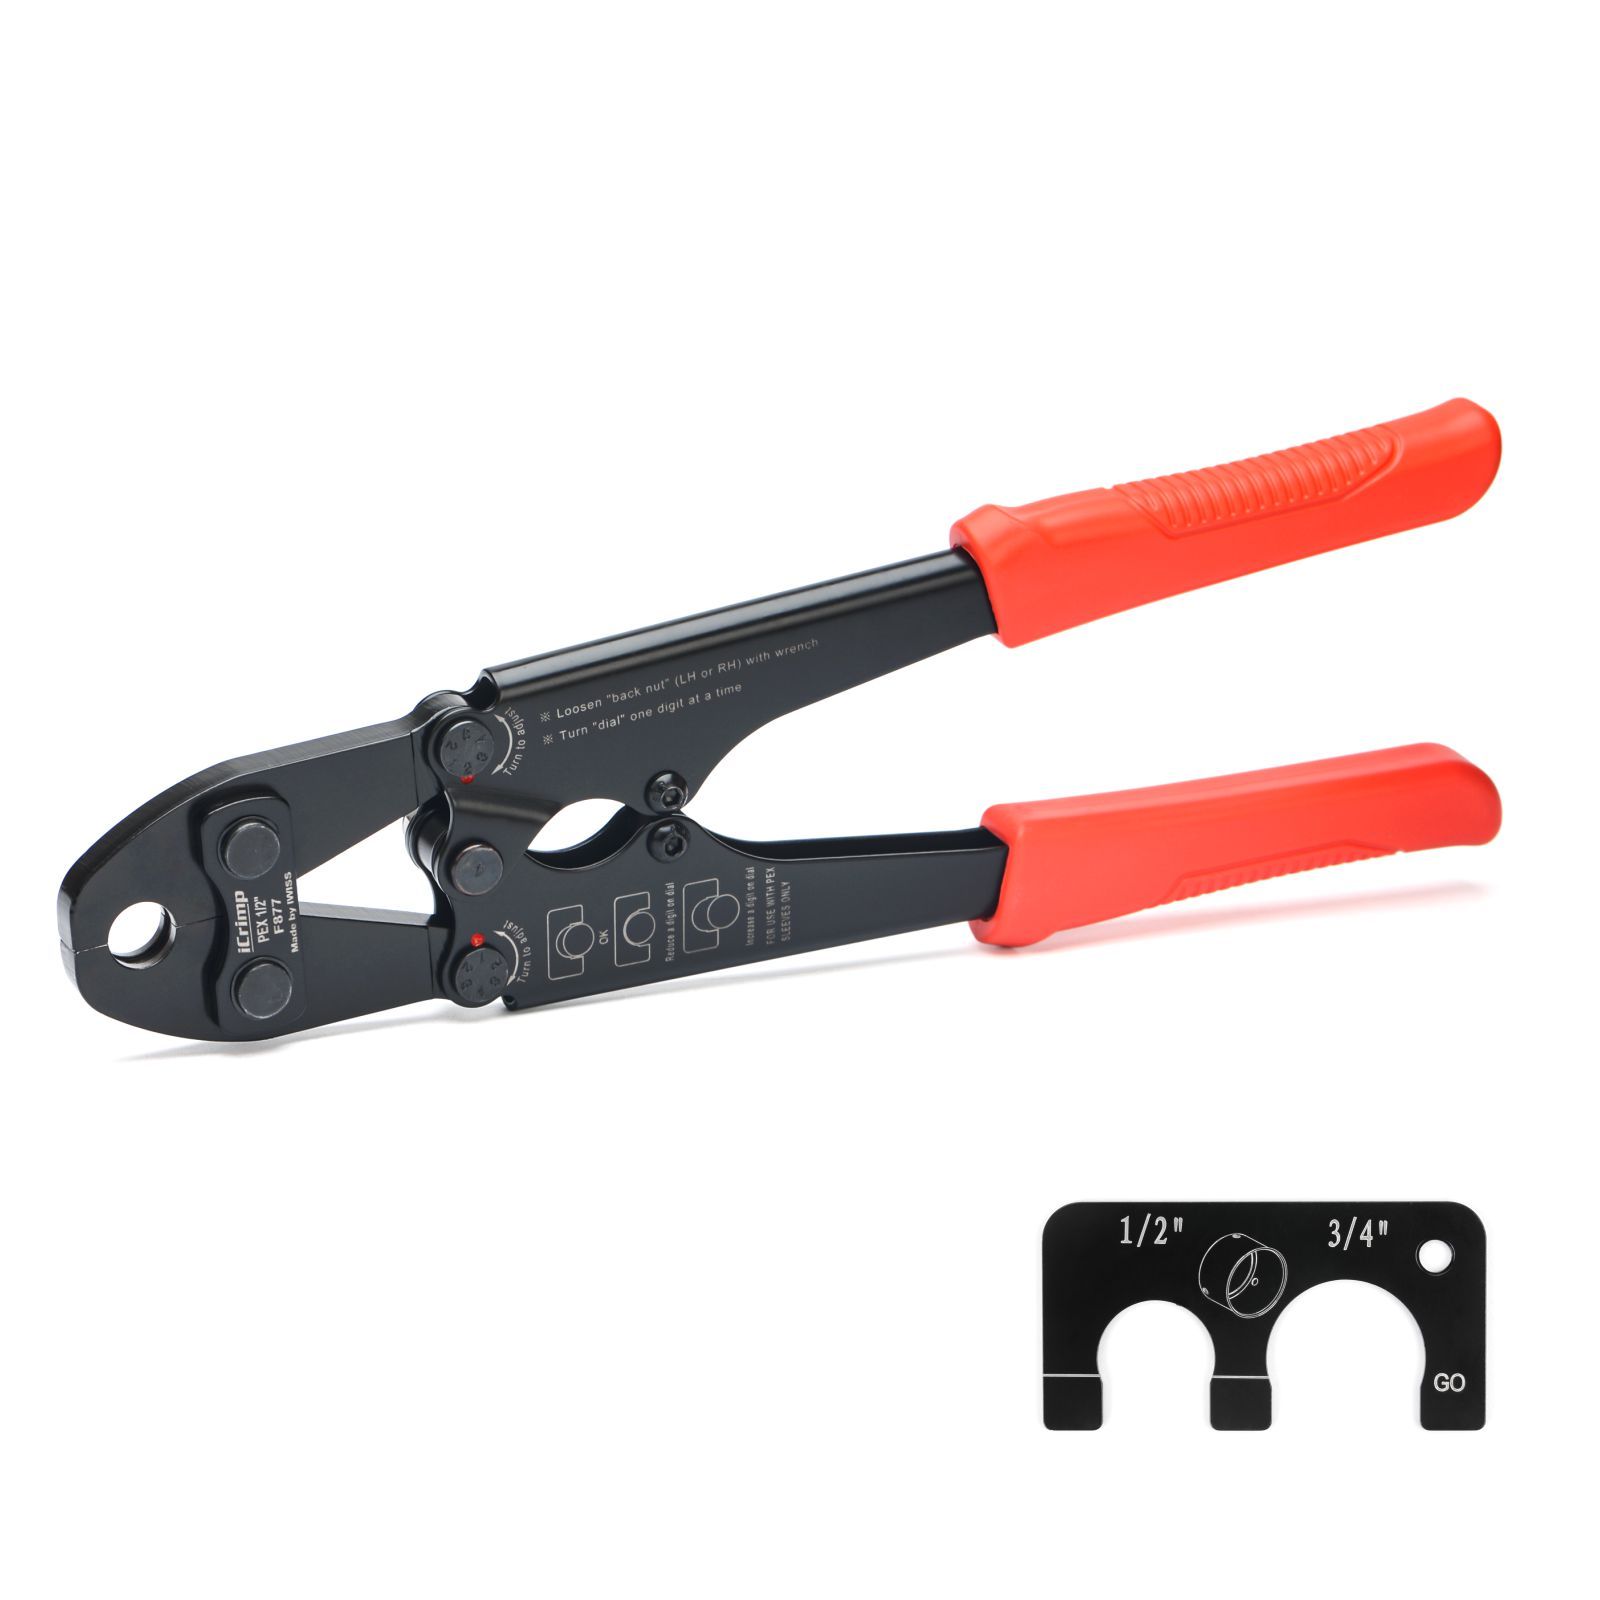 1/2" ASTM 877 SS Sleeves Crimping Tool